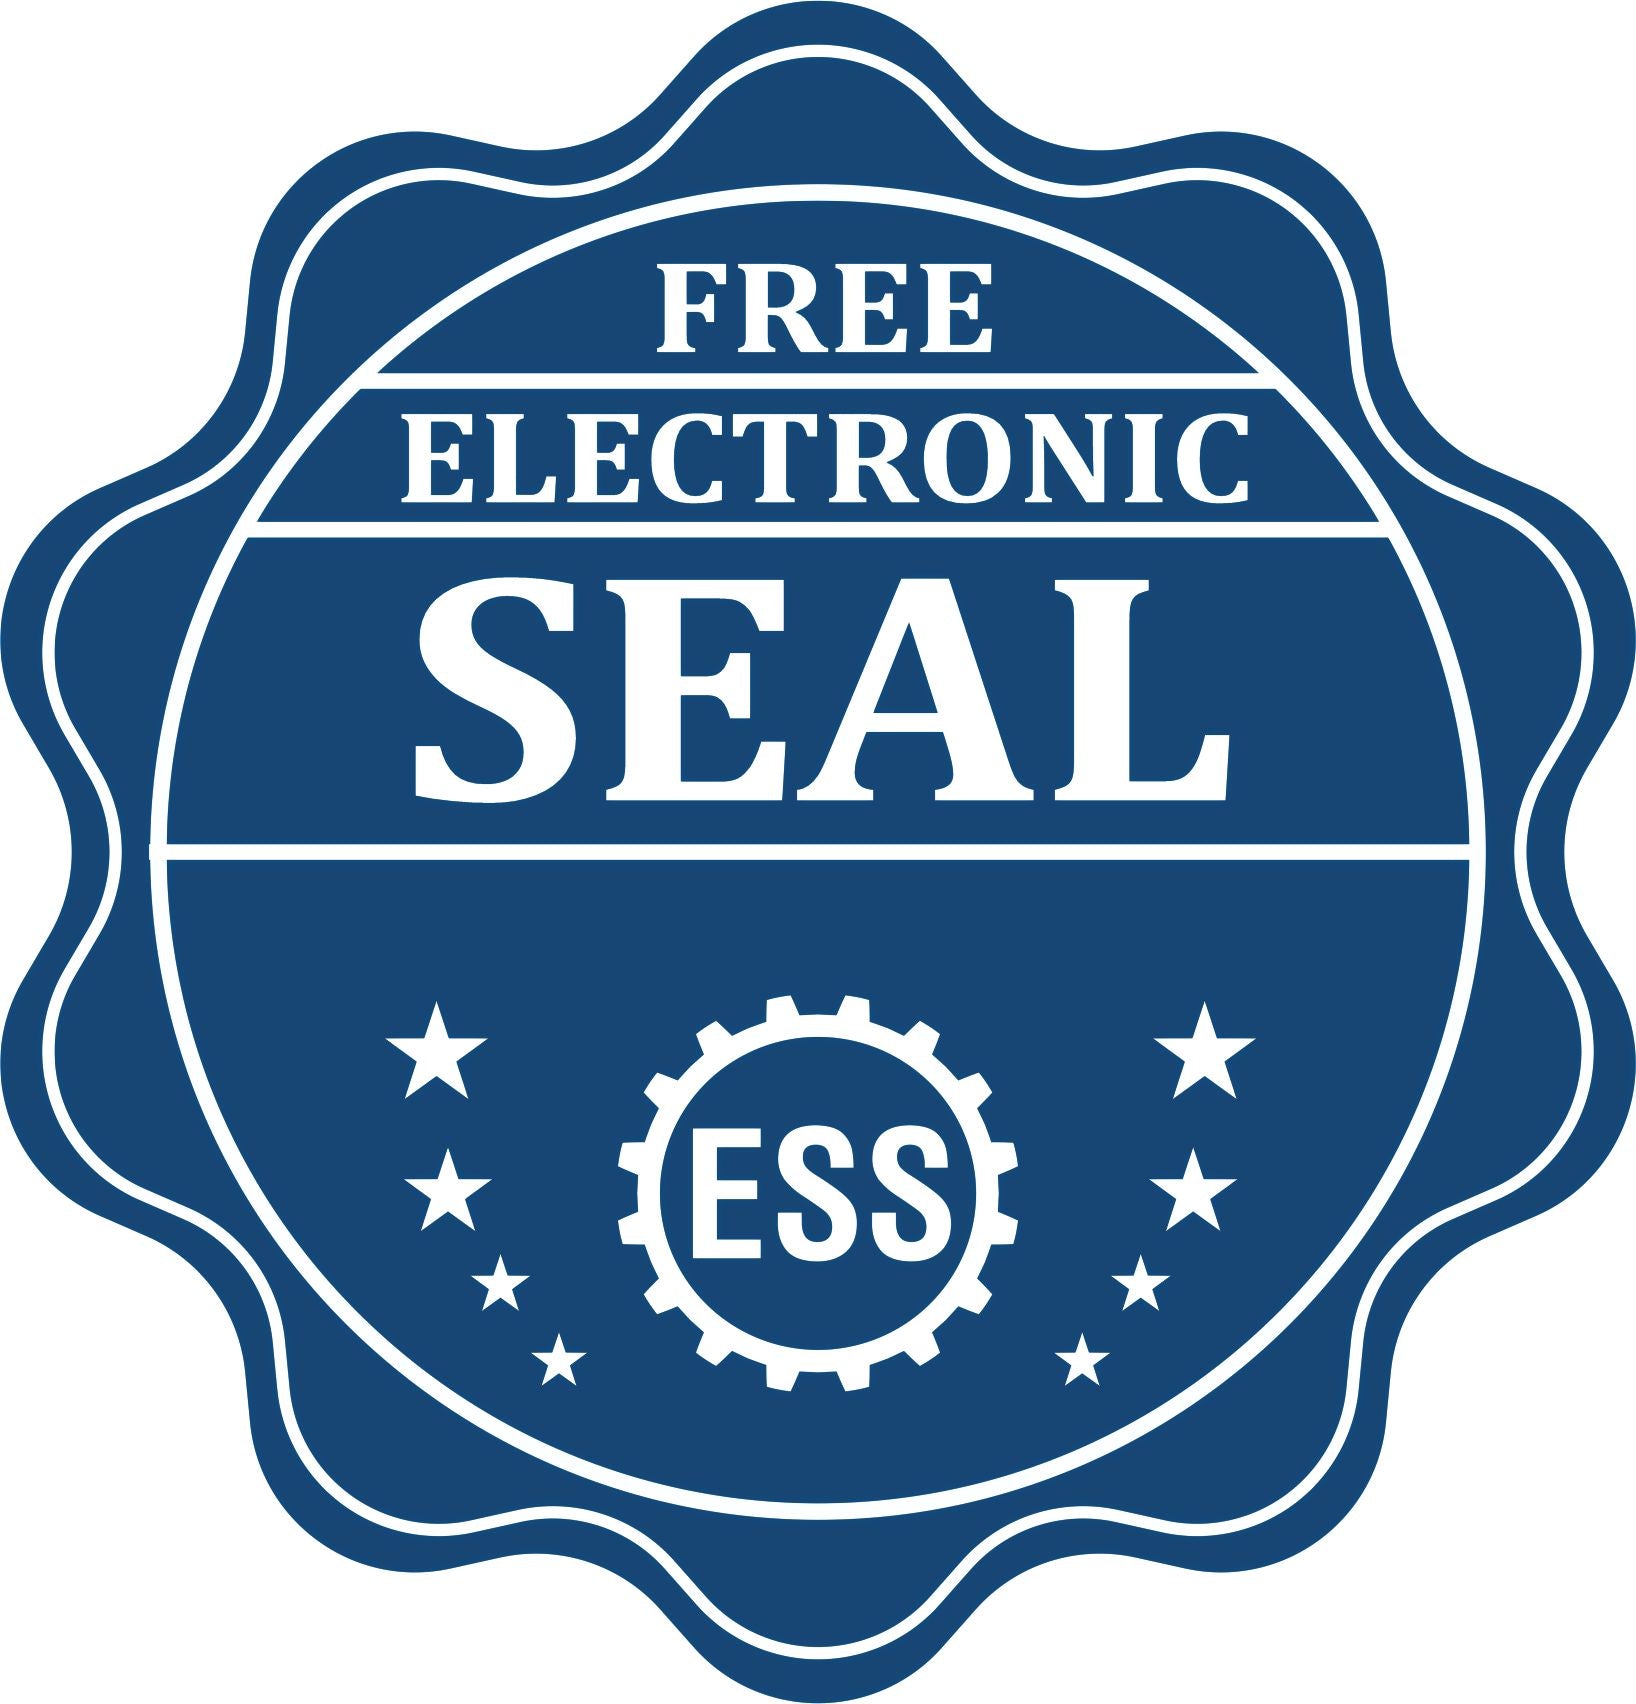 A badge showing a free electronic seal for the State of Oklahoma Long Reach Architectural Embossing Seal with stars and the ESS gear on the emblem.